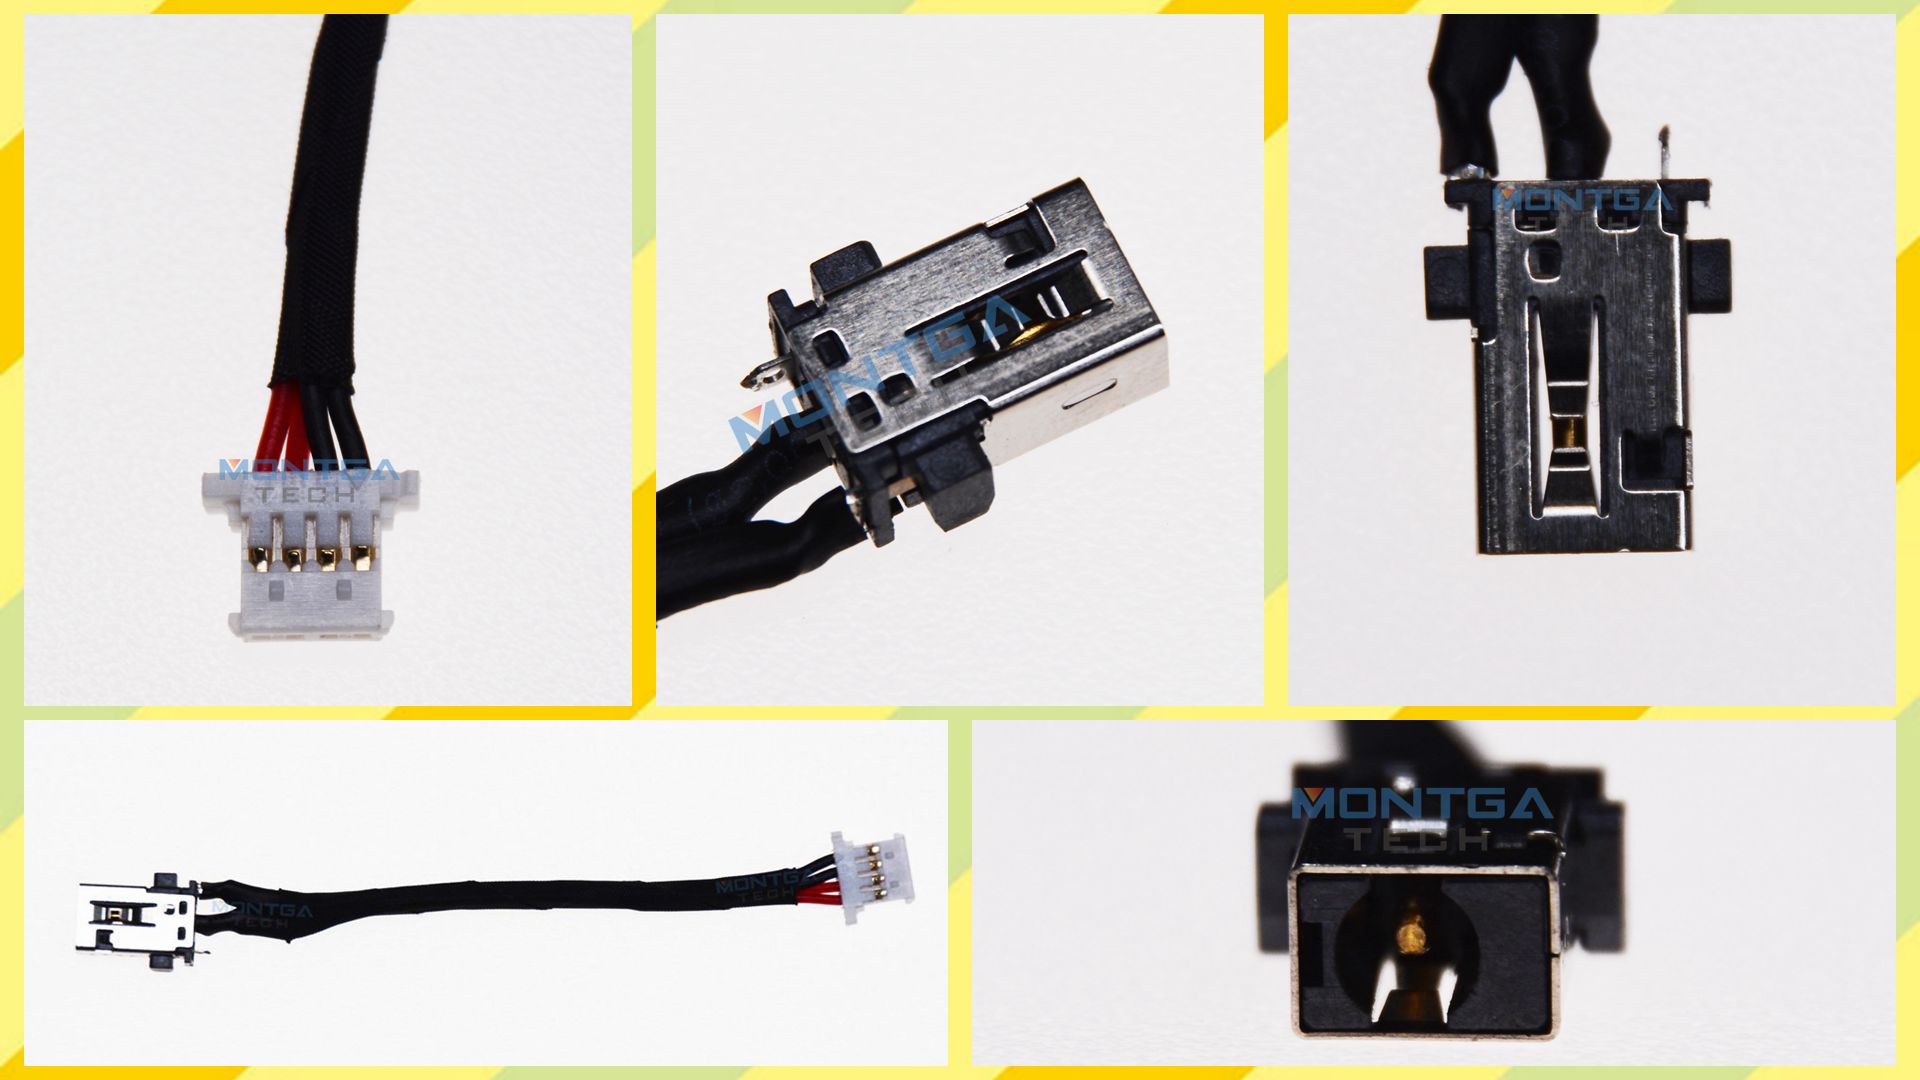 Acer SF114-32 charging connector, Acer SF114-32 DC Power Jack, Acer SF114-32 DC IN Cable, Acer SF114-32 Power Jack, Acer SF114-32 plug, Acer SF114-32 Jack socket, Acer SF114-32 connecteur de charge, 